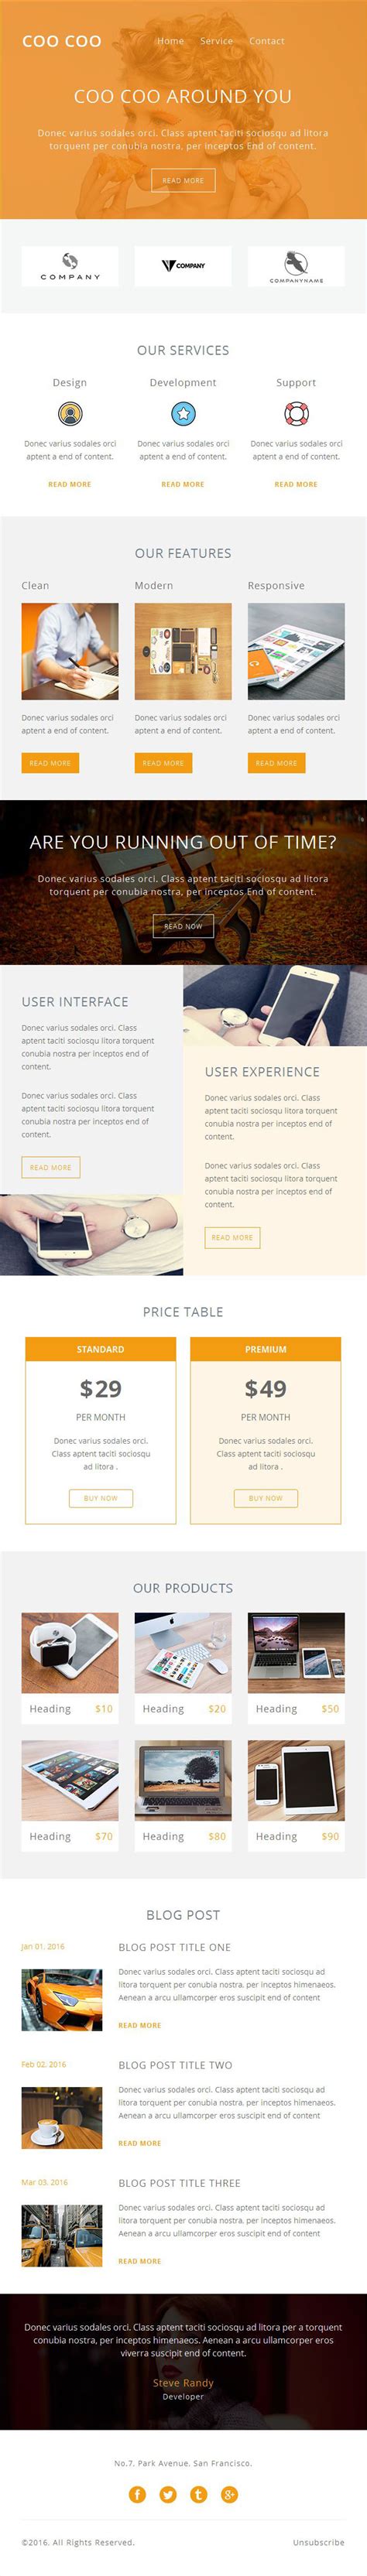 responsive email template  pennyblack  atcreativemarket email design inspiration